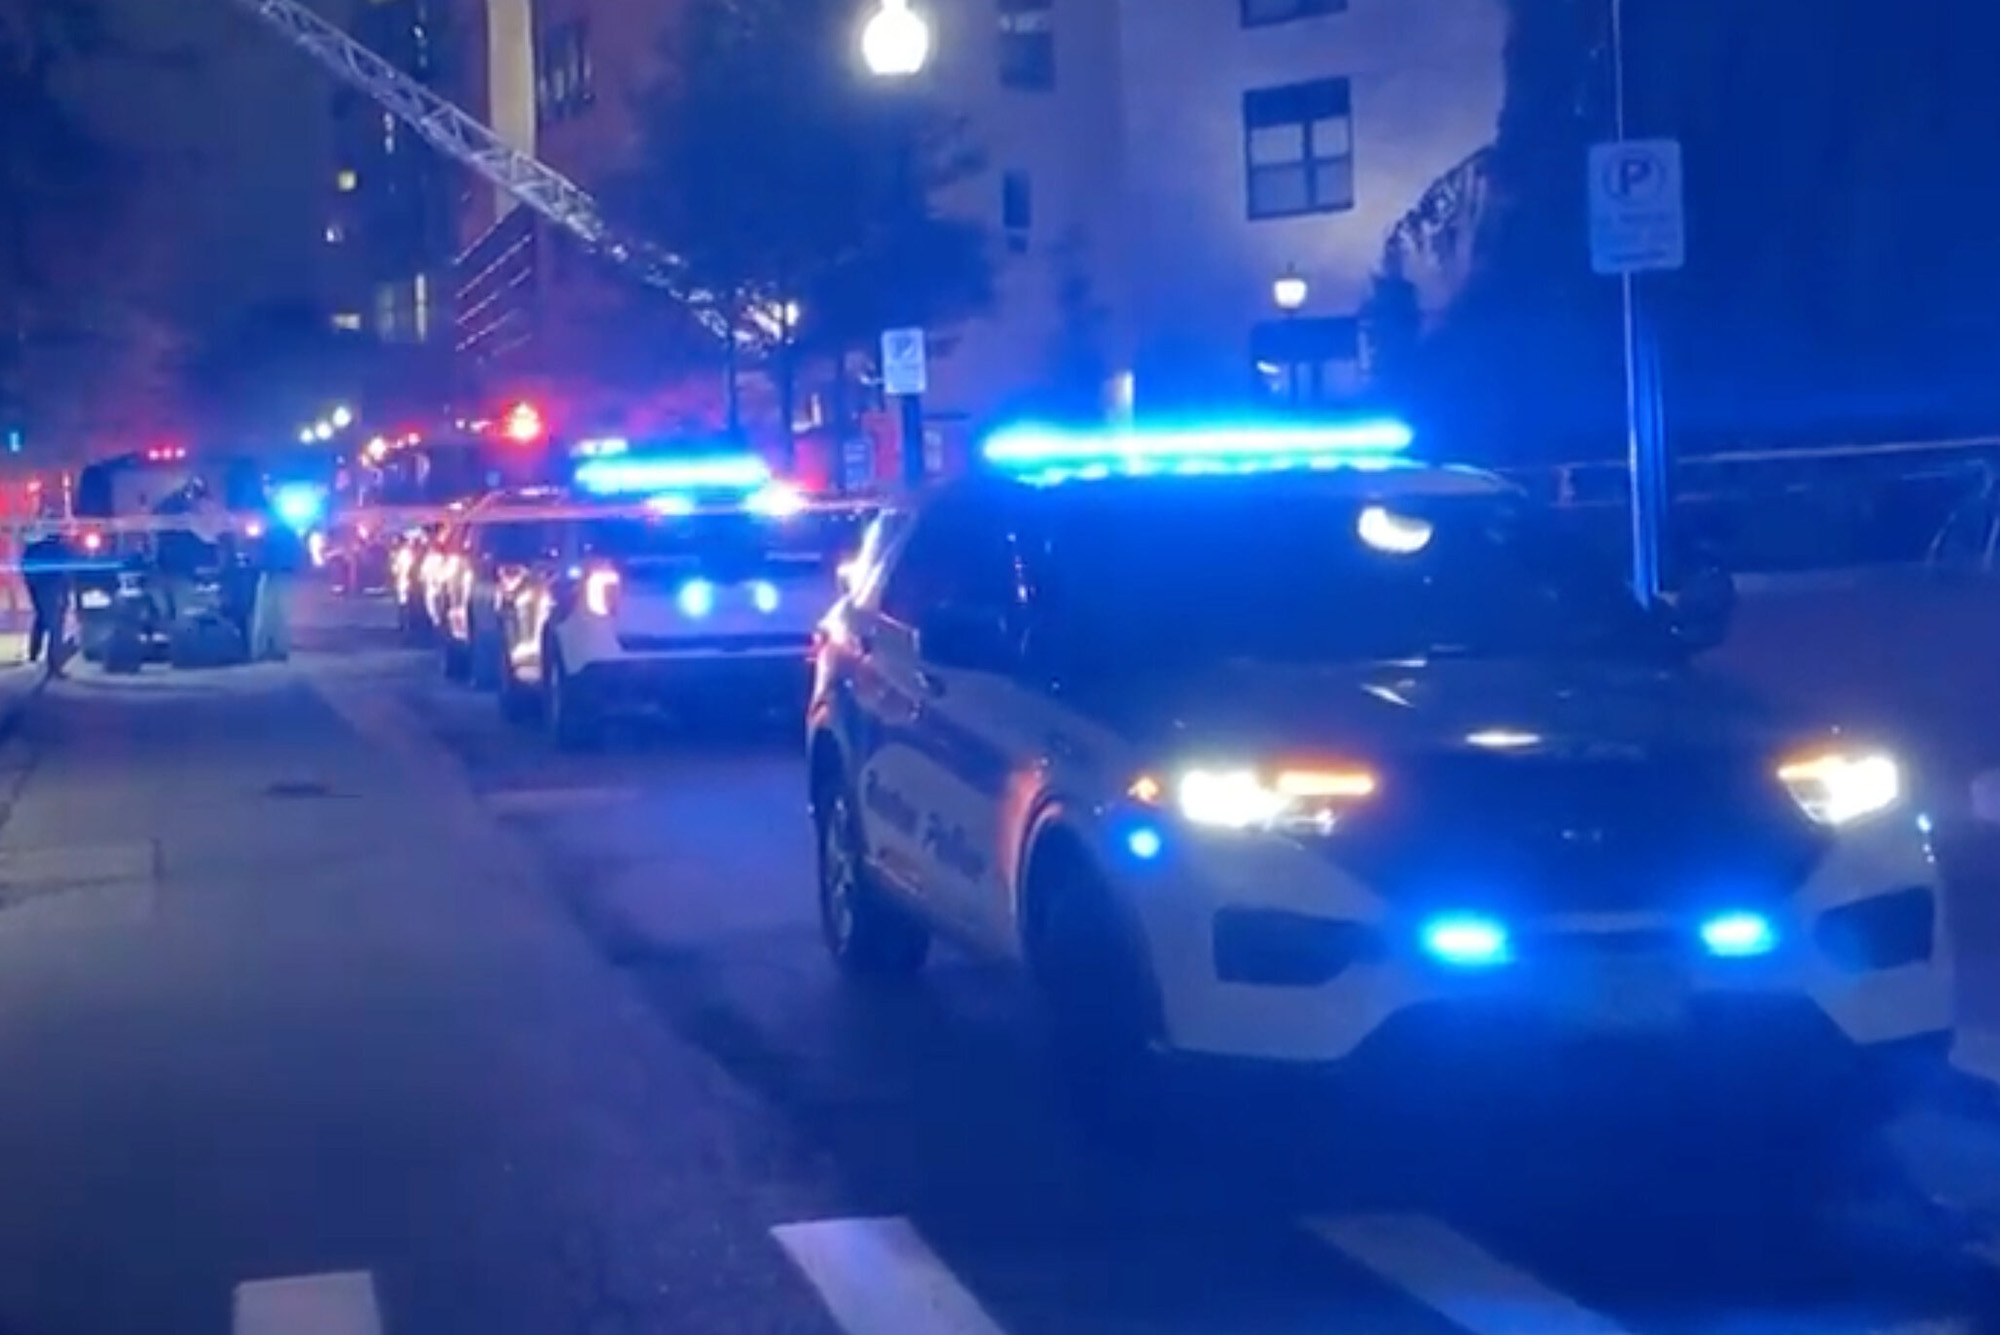 Screenshot of the scene of the package explosion at Northeastern. The scene is tinted blue form police cars and emergency vehicles blocking the street as officials work on the scene.